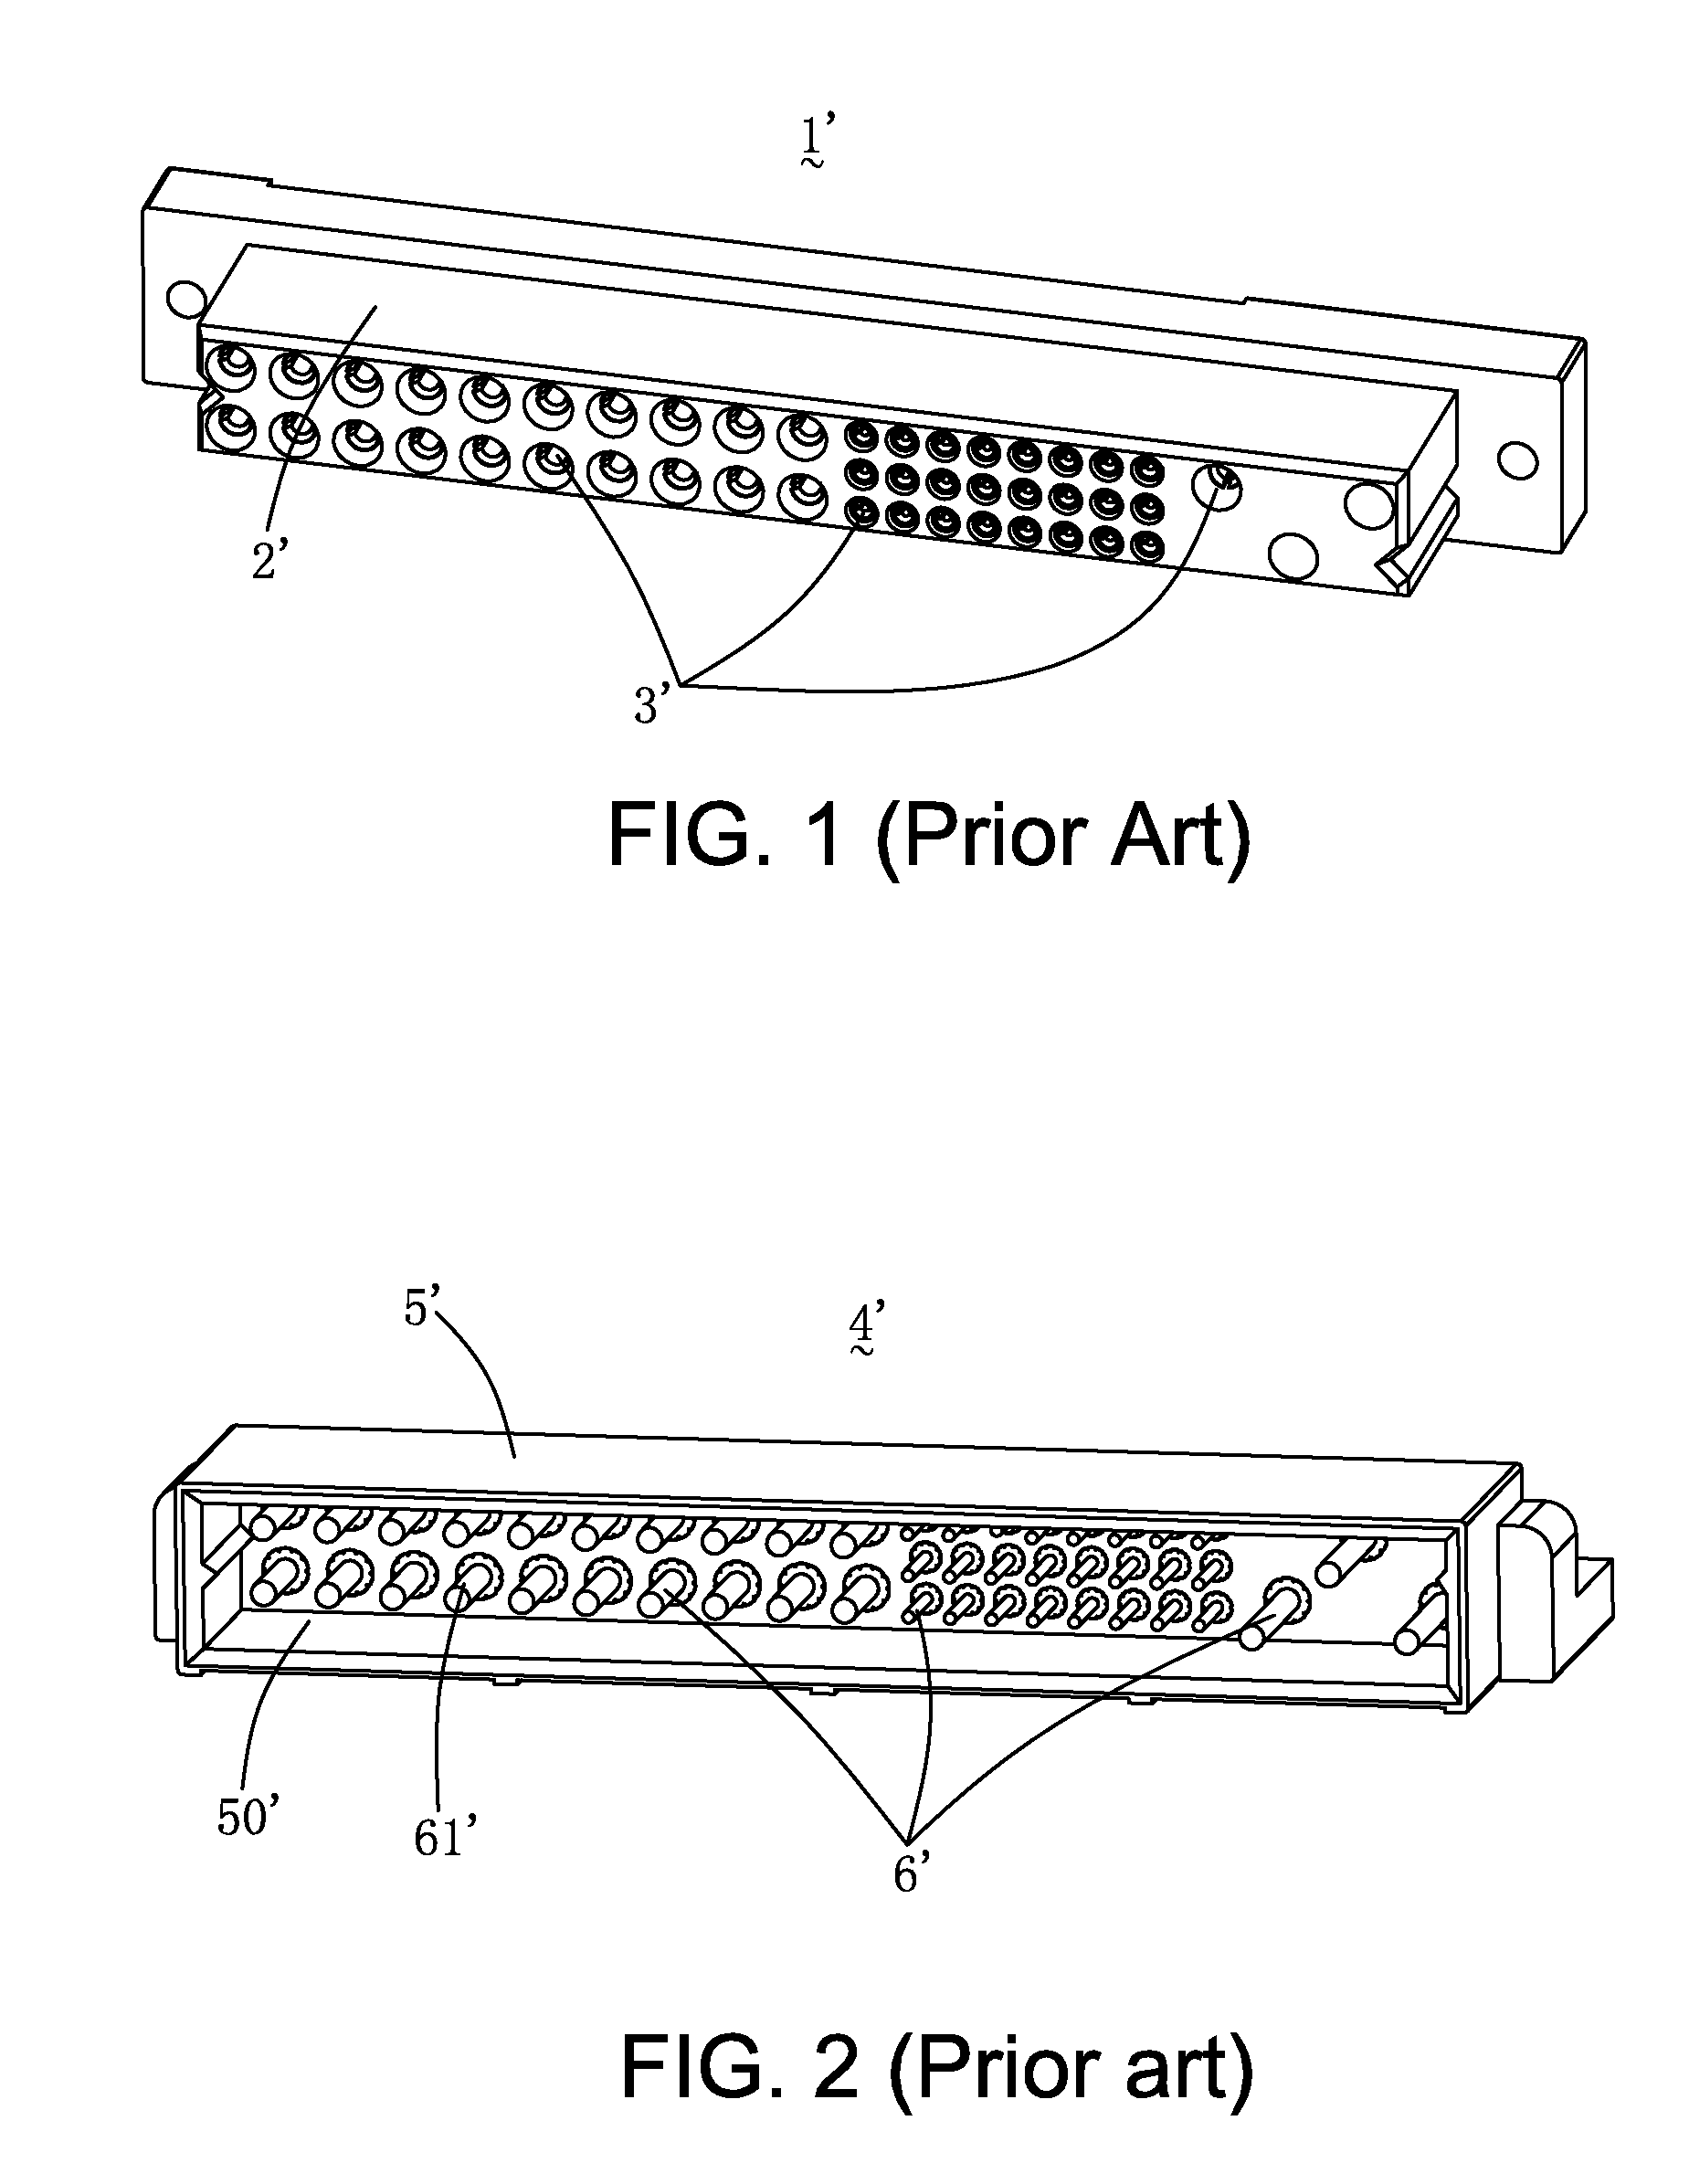 Electrical connector and electrical connector assembly having heat-radiating structures